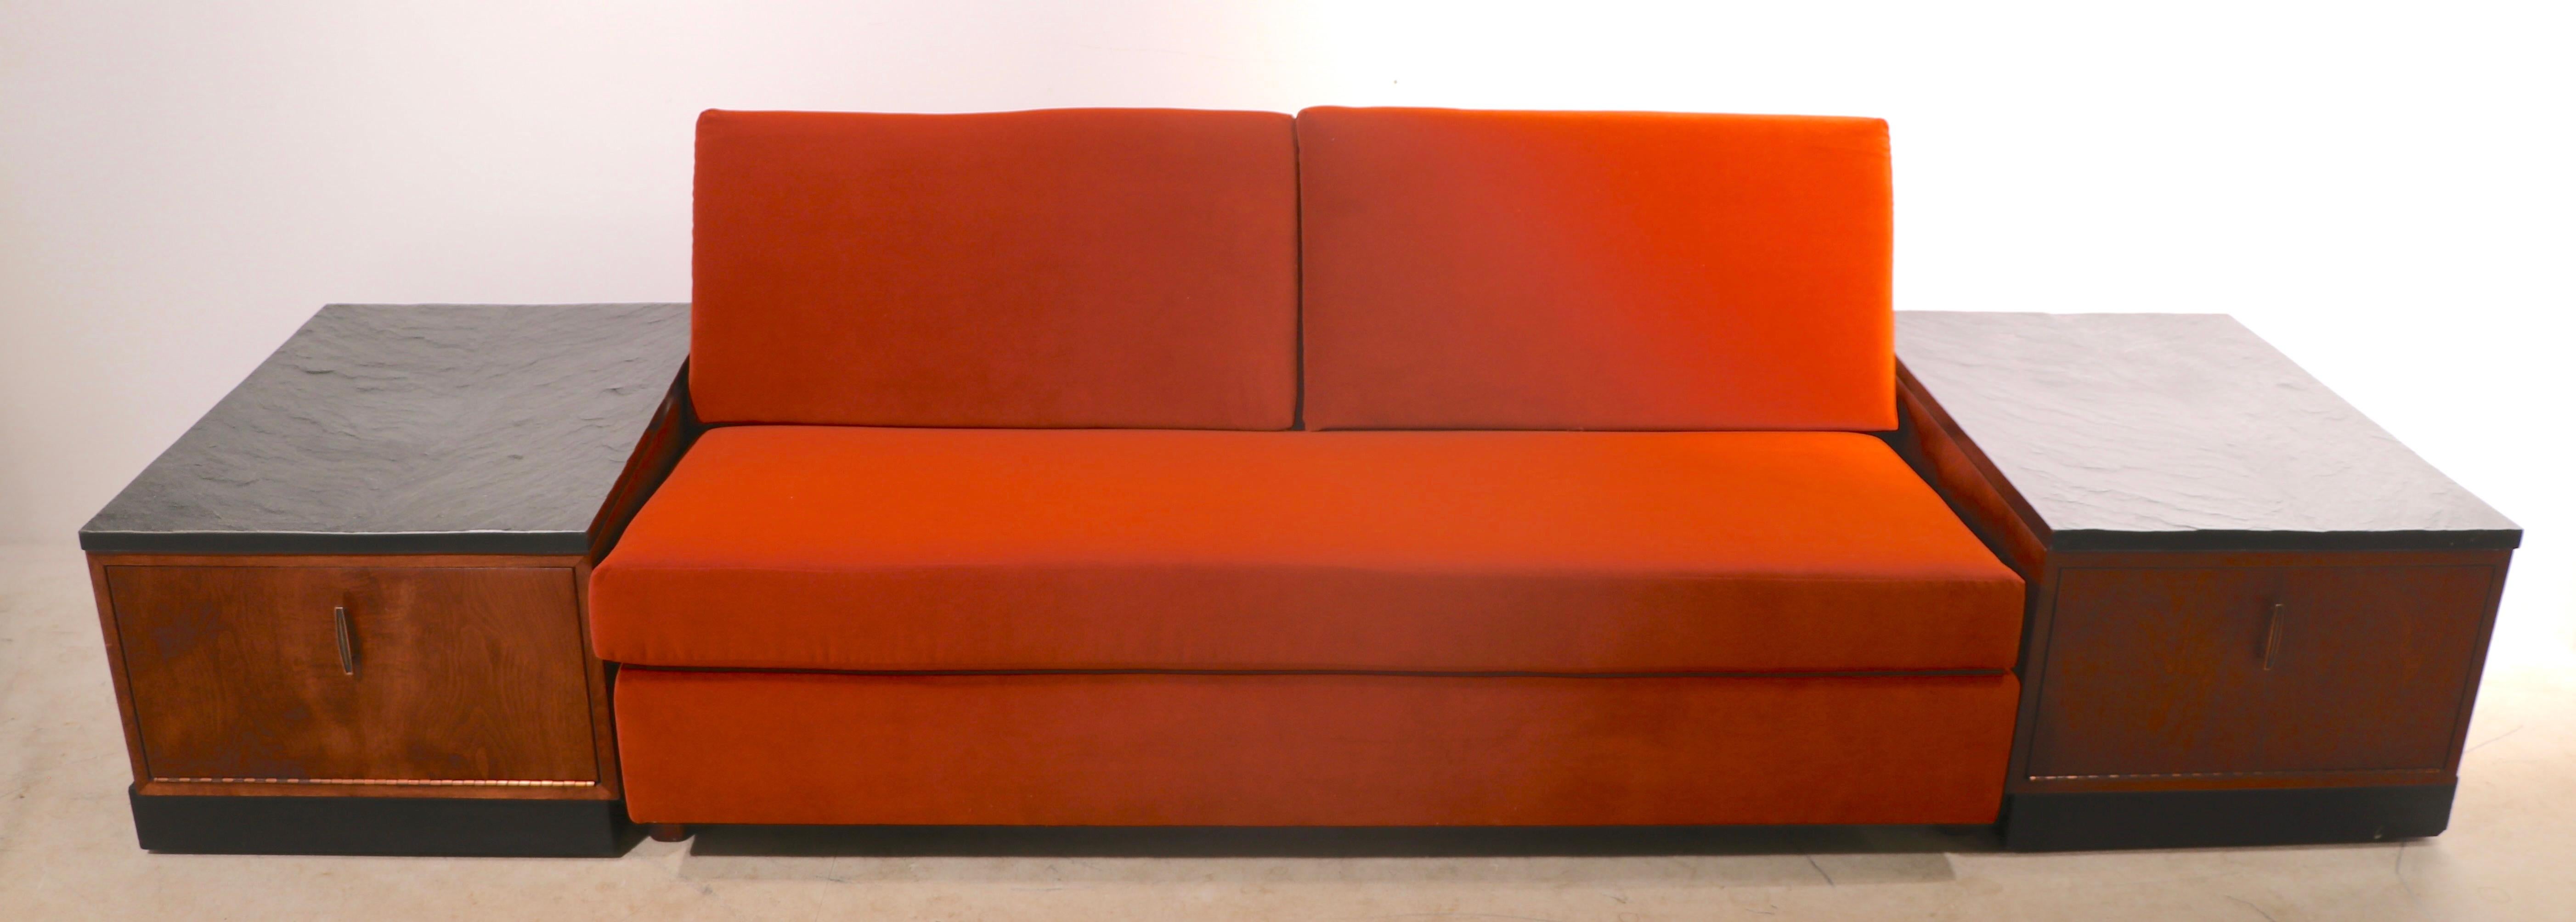 Mid-Century Modern Bench Sofa with Storage Cabinets by Adrian Pearsall for Craft Associates